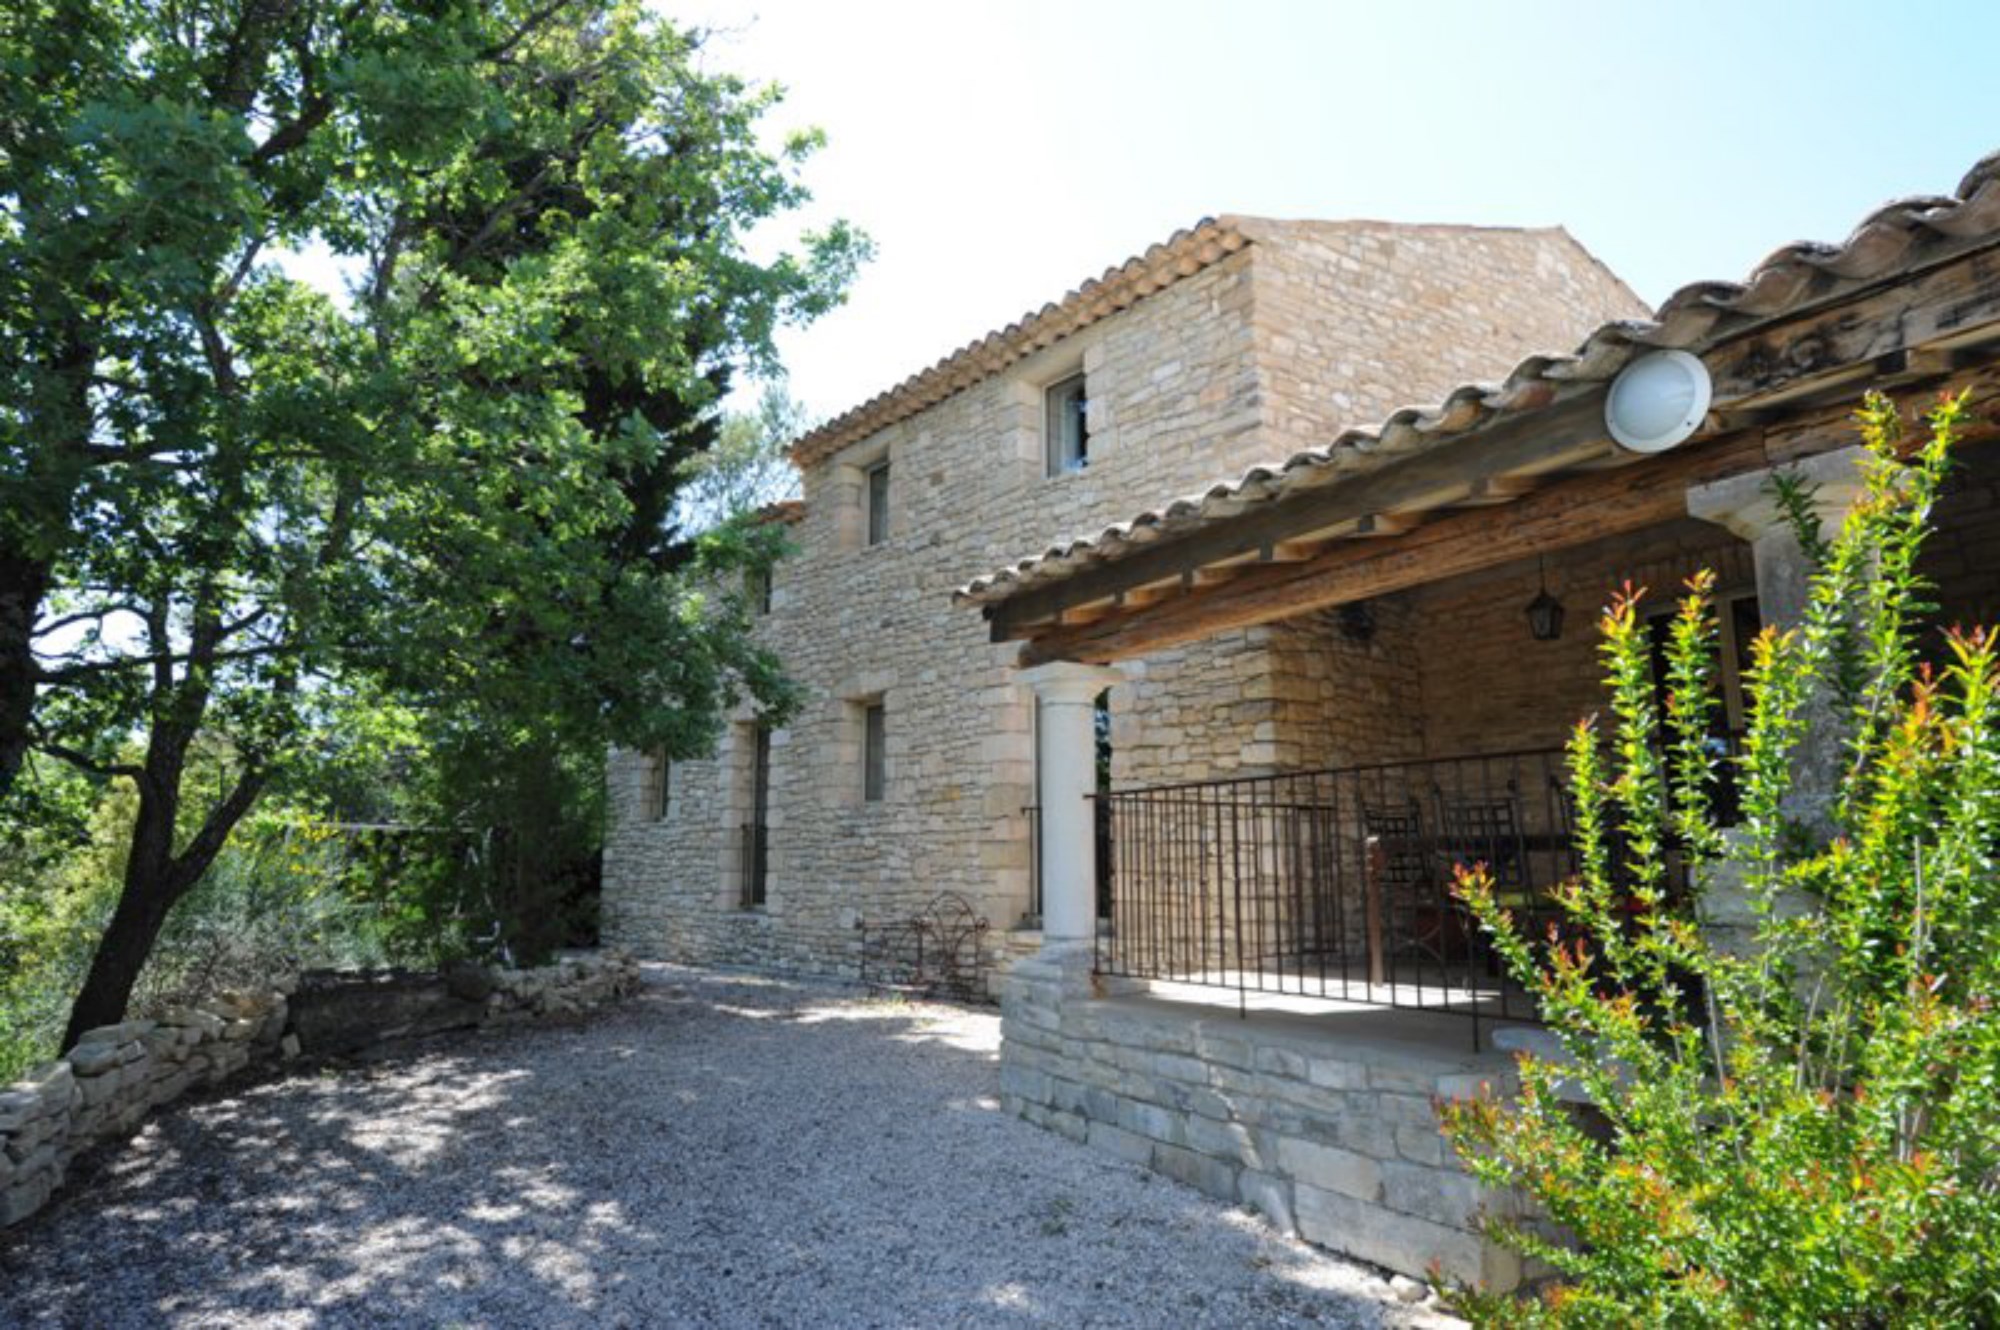 Stone house for sale, with pool and breathtaking views over the Luberon valley